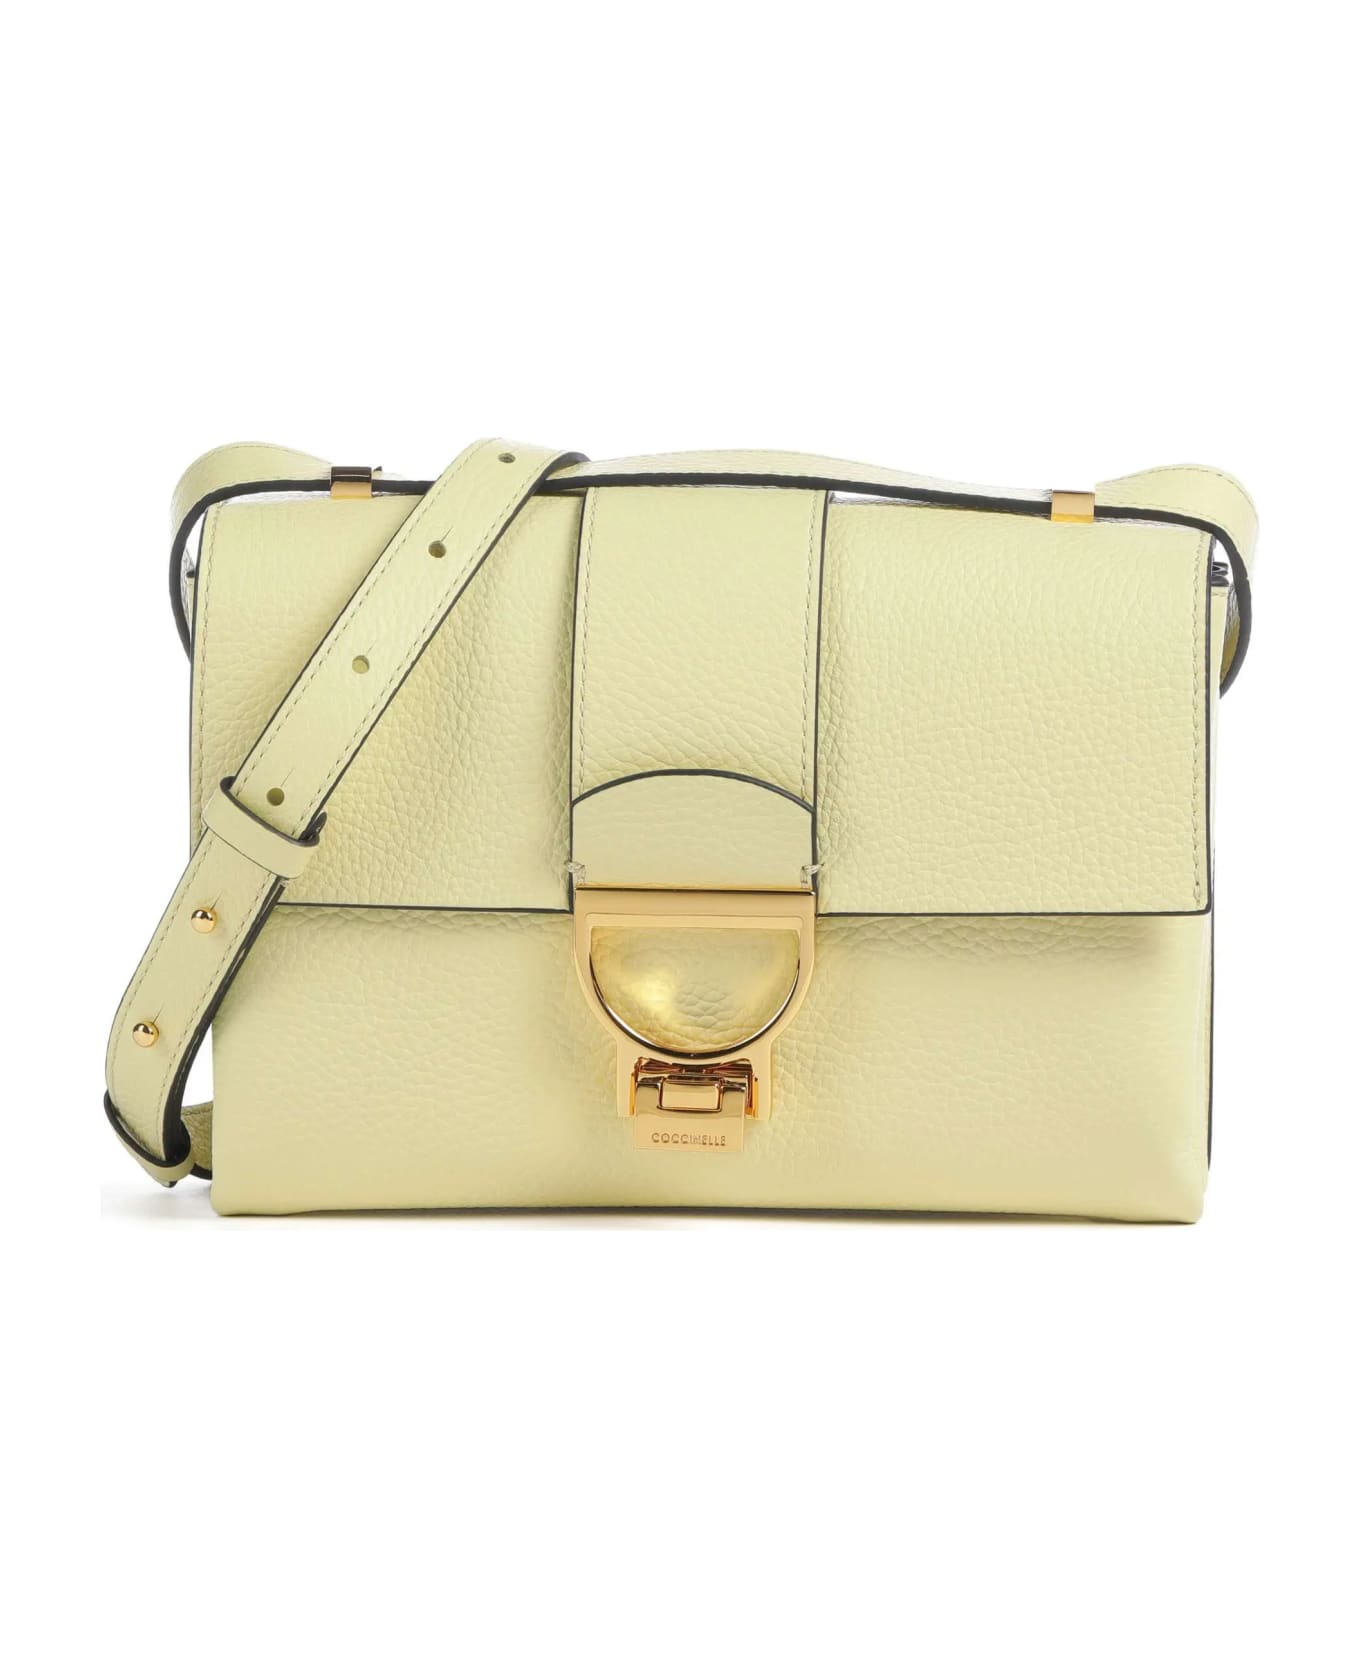 Coccinelle Arlettis Leather Bag - Lime wash